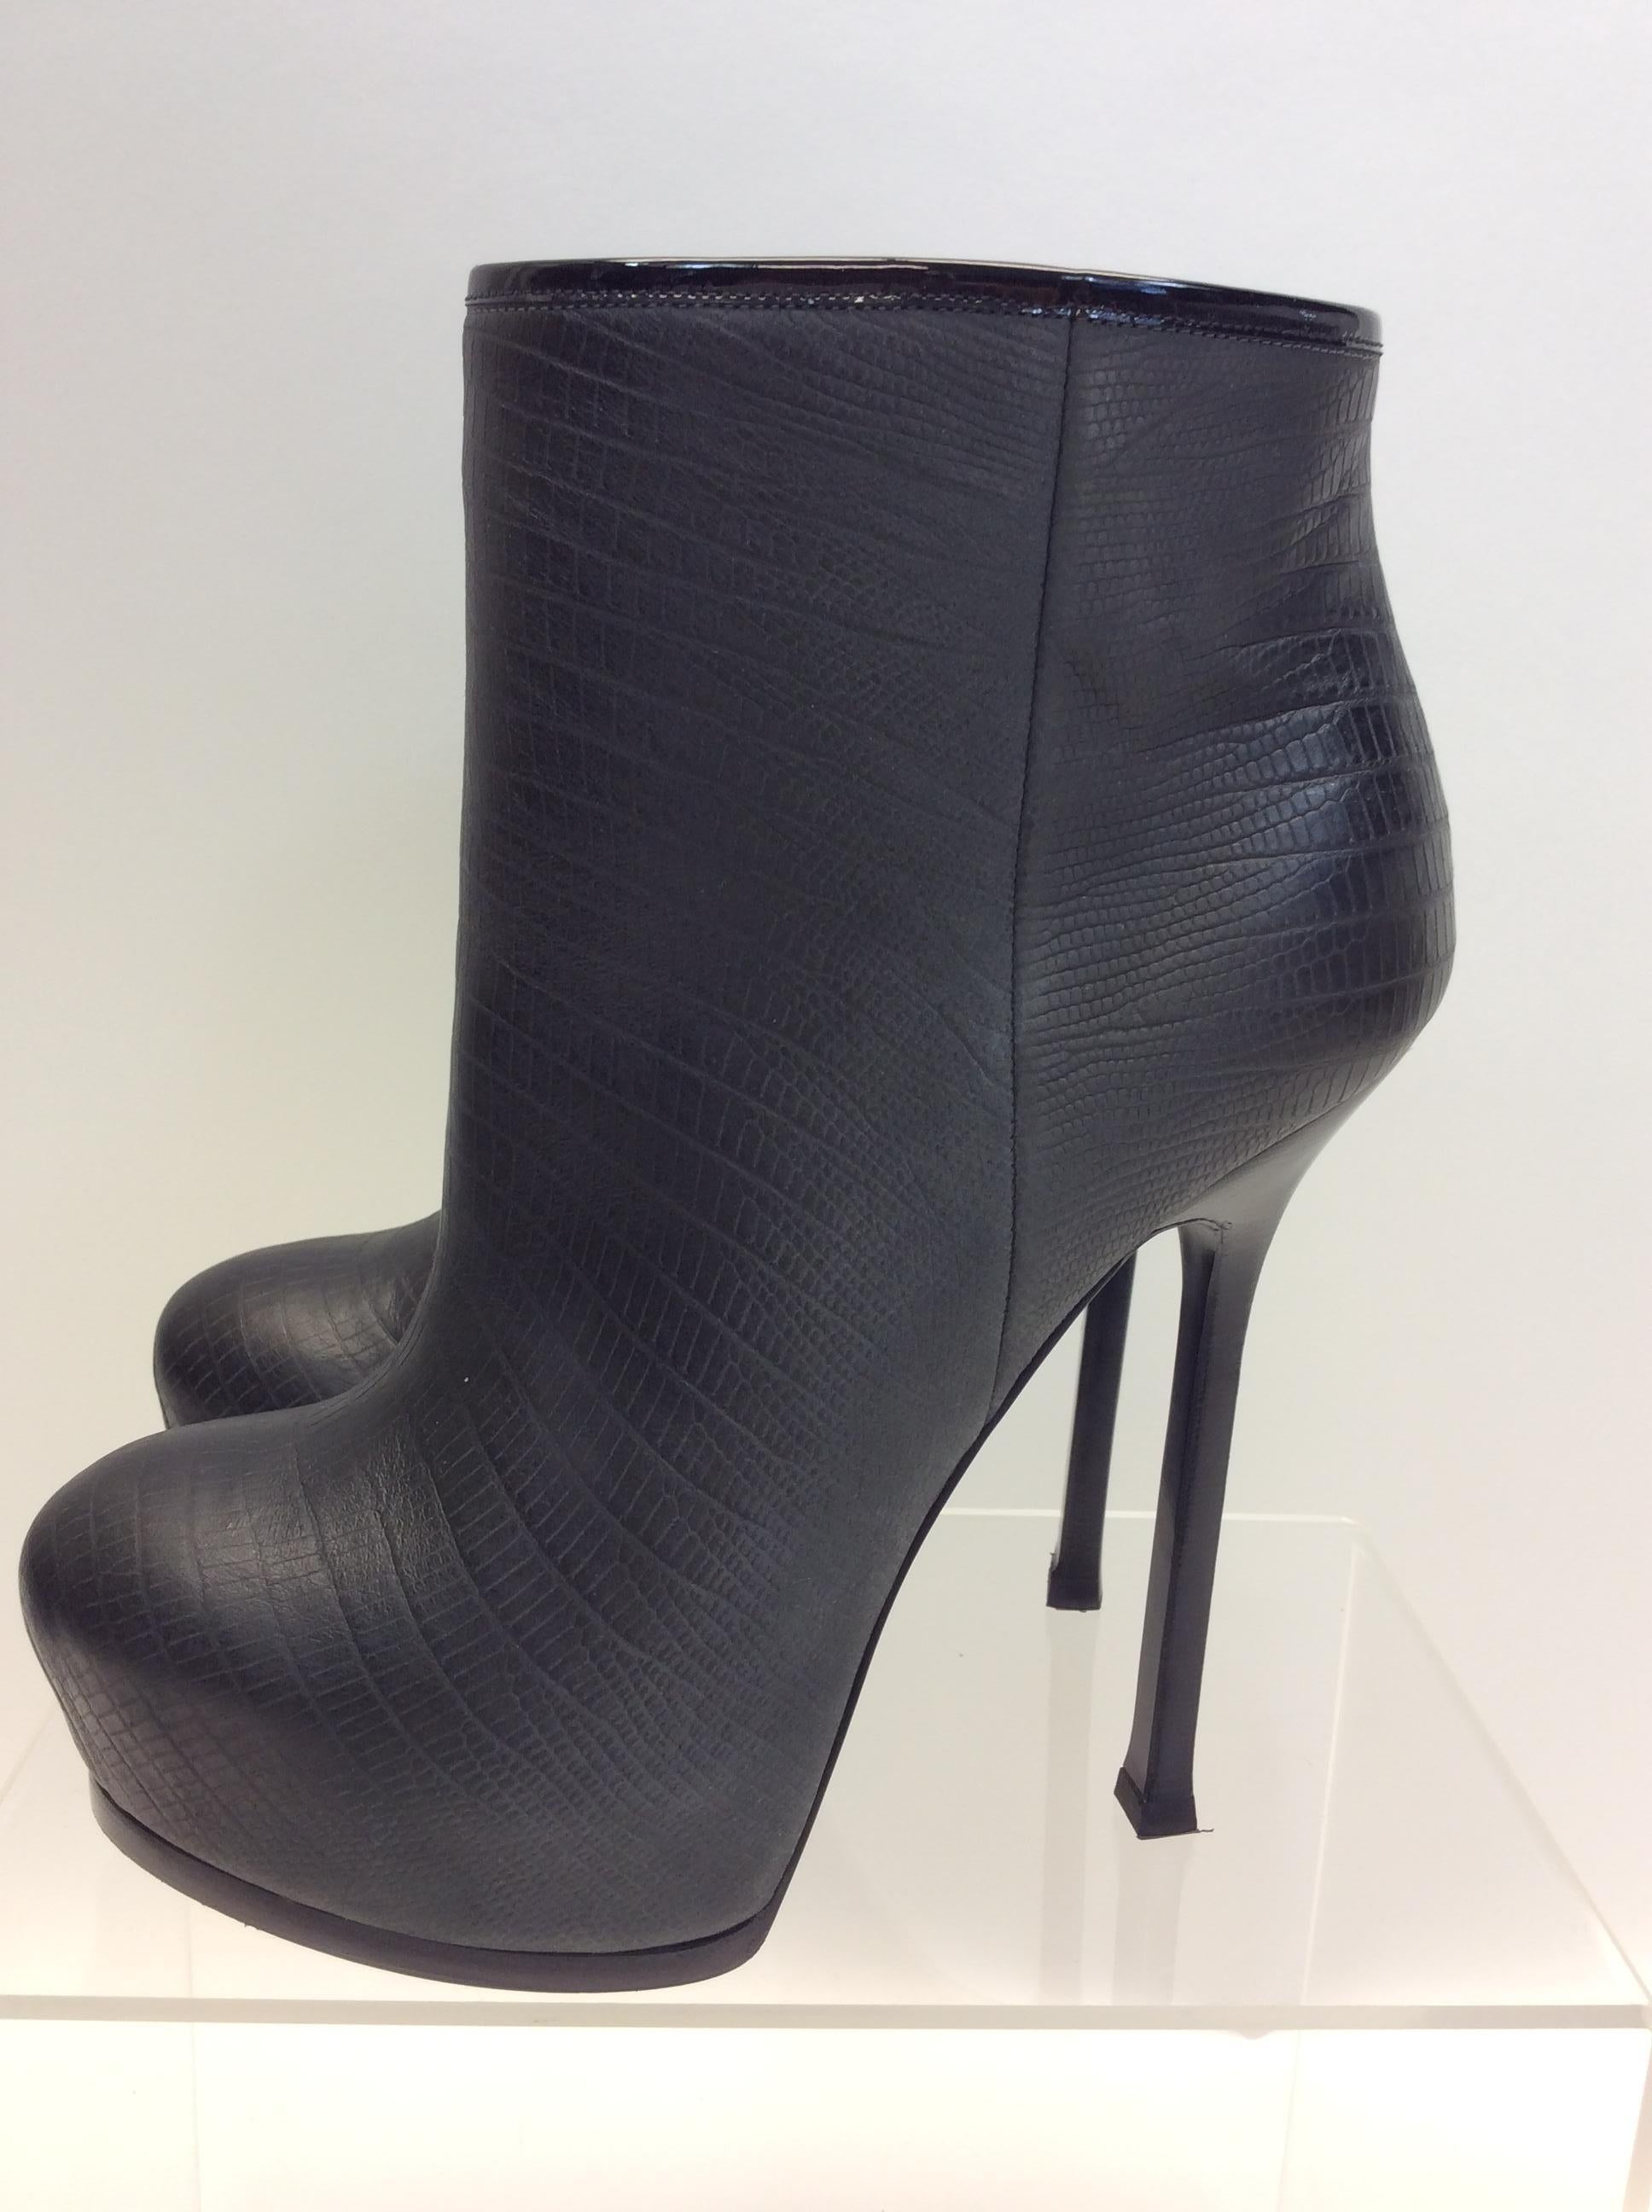 Yves Saint Laurent Black Leather Bootie
$499
Made in Italy
Size 37
1.5” platform
5” heel
